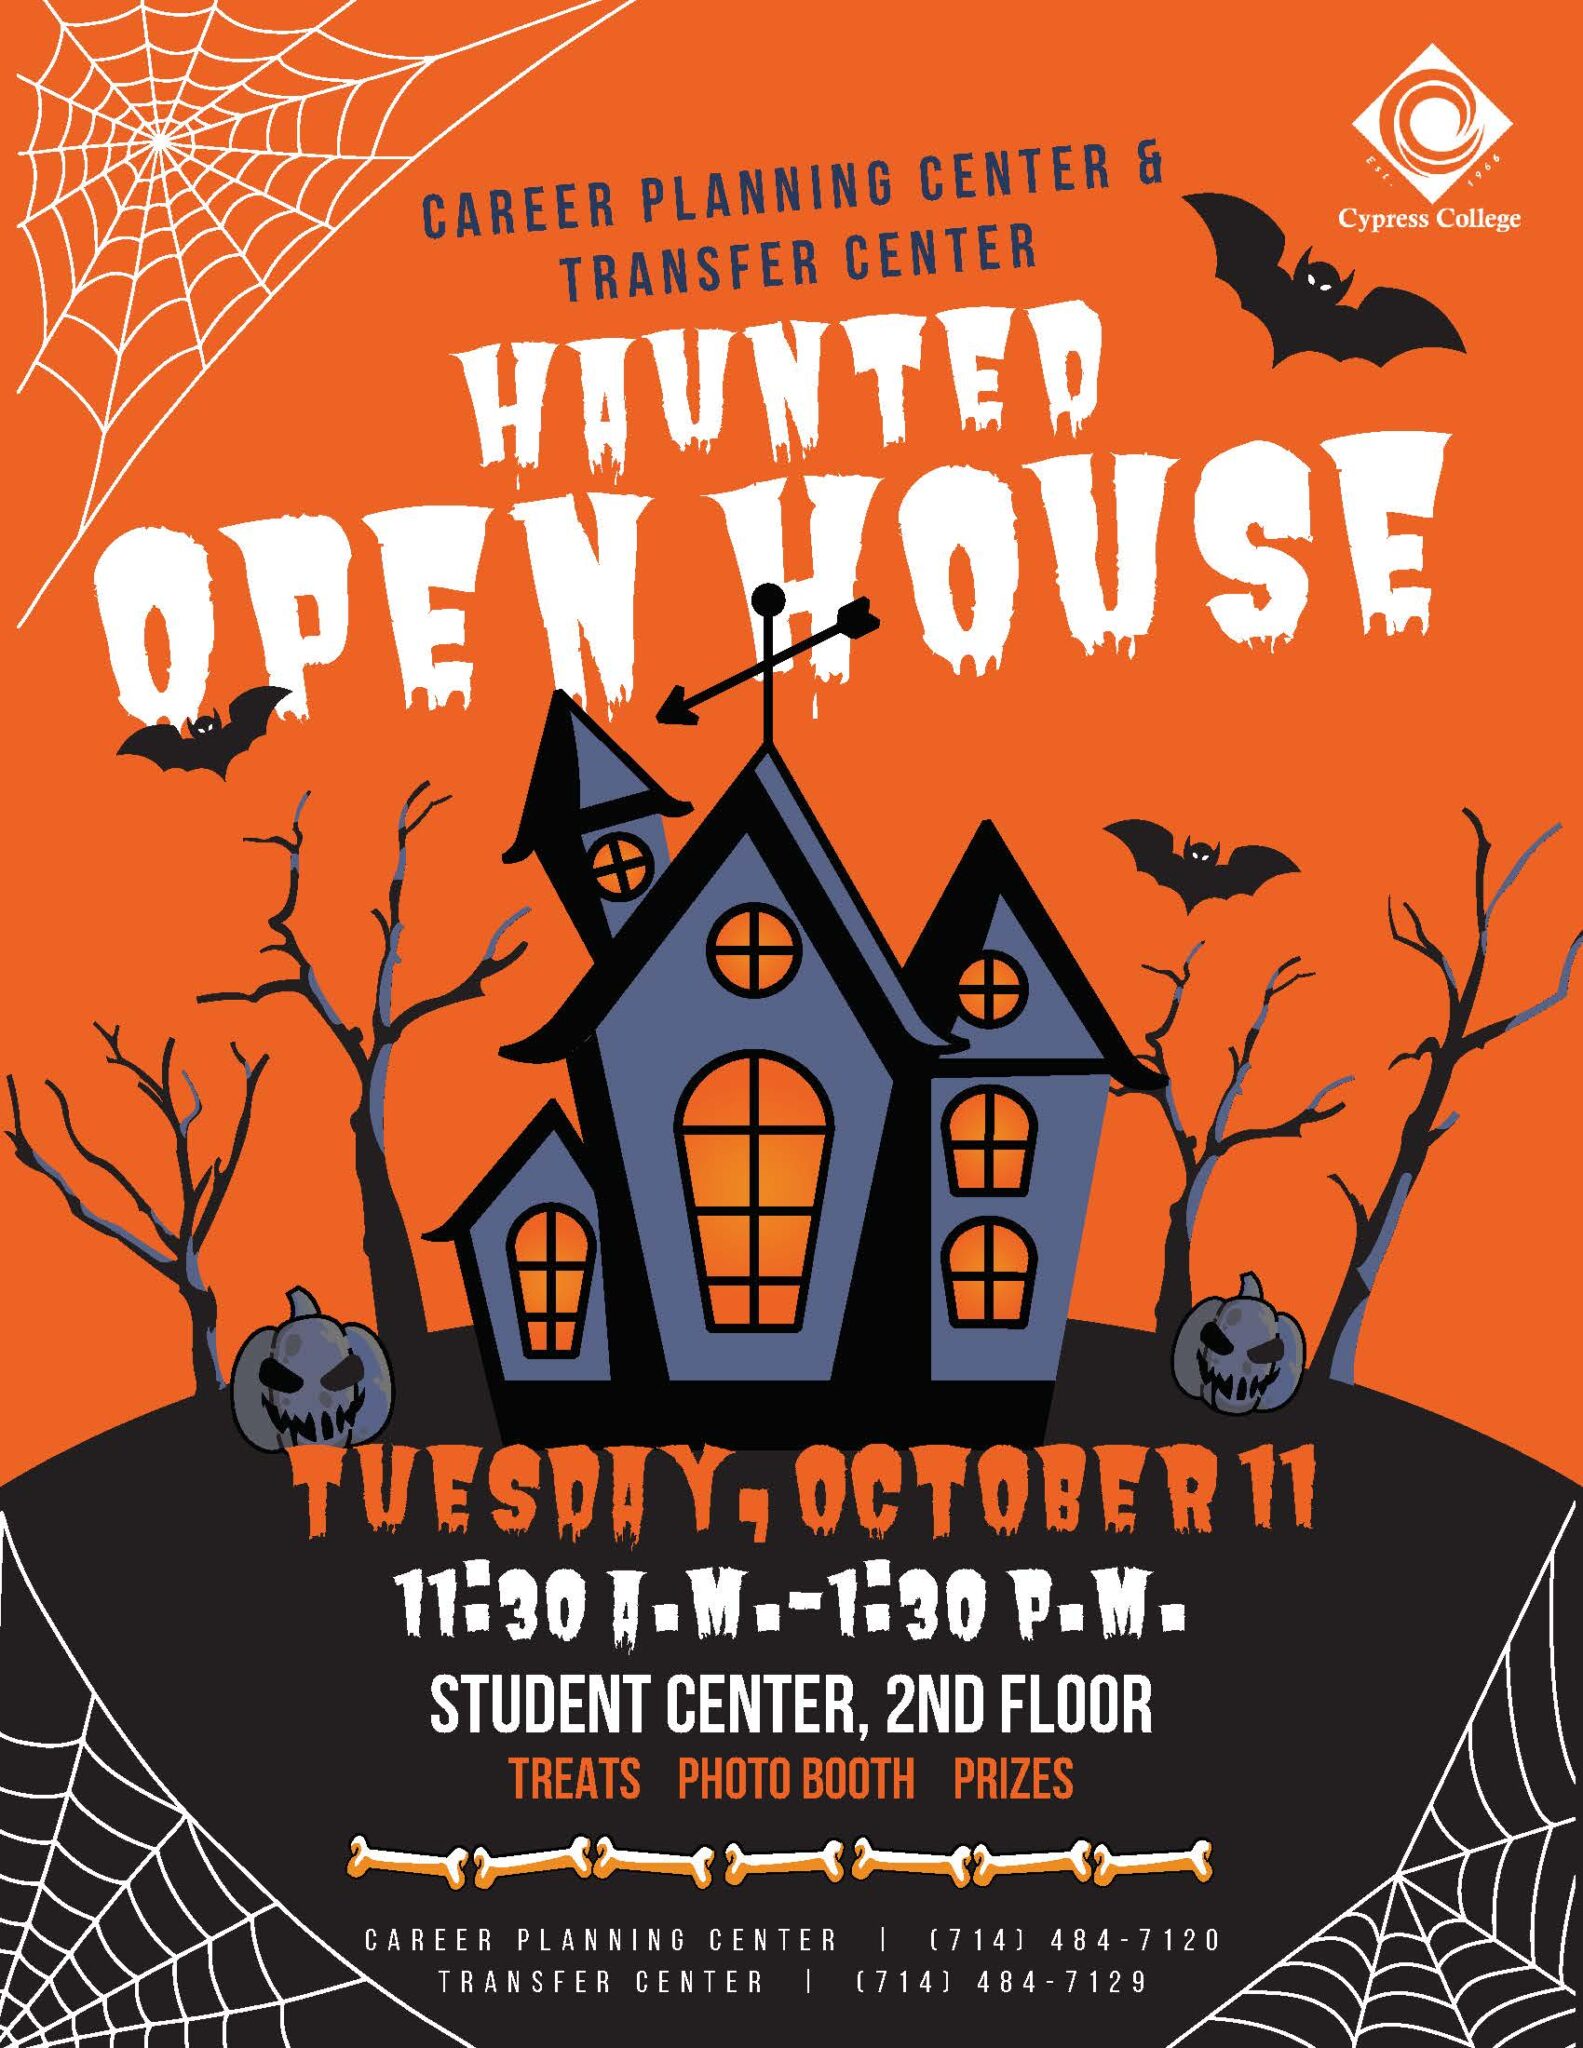 Haunted Open House flyer with orange background, spooky house, bats, jack-o-lanterns, trees, and spider webs.